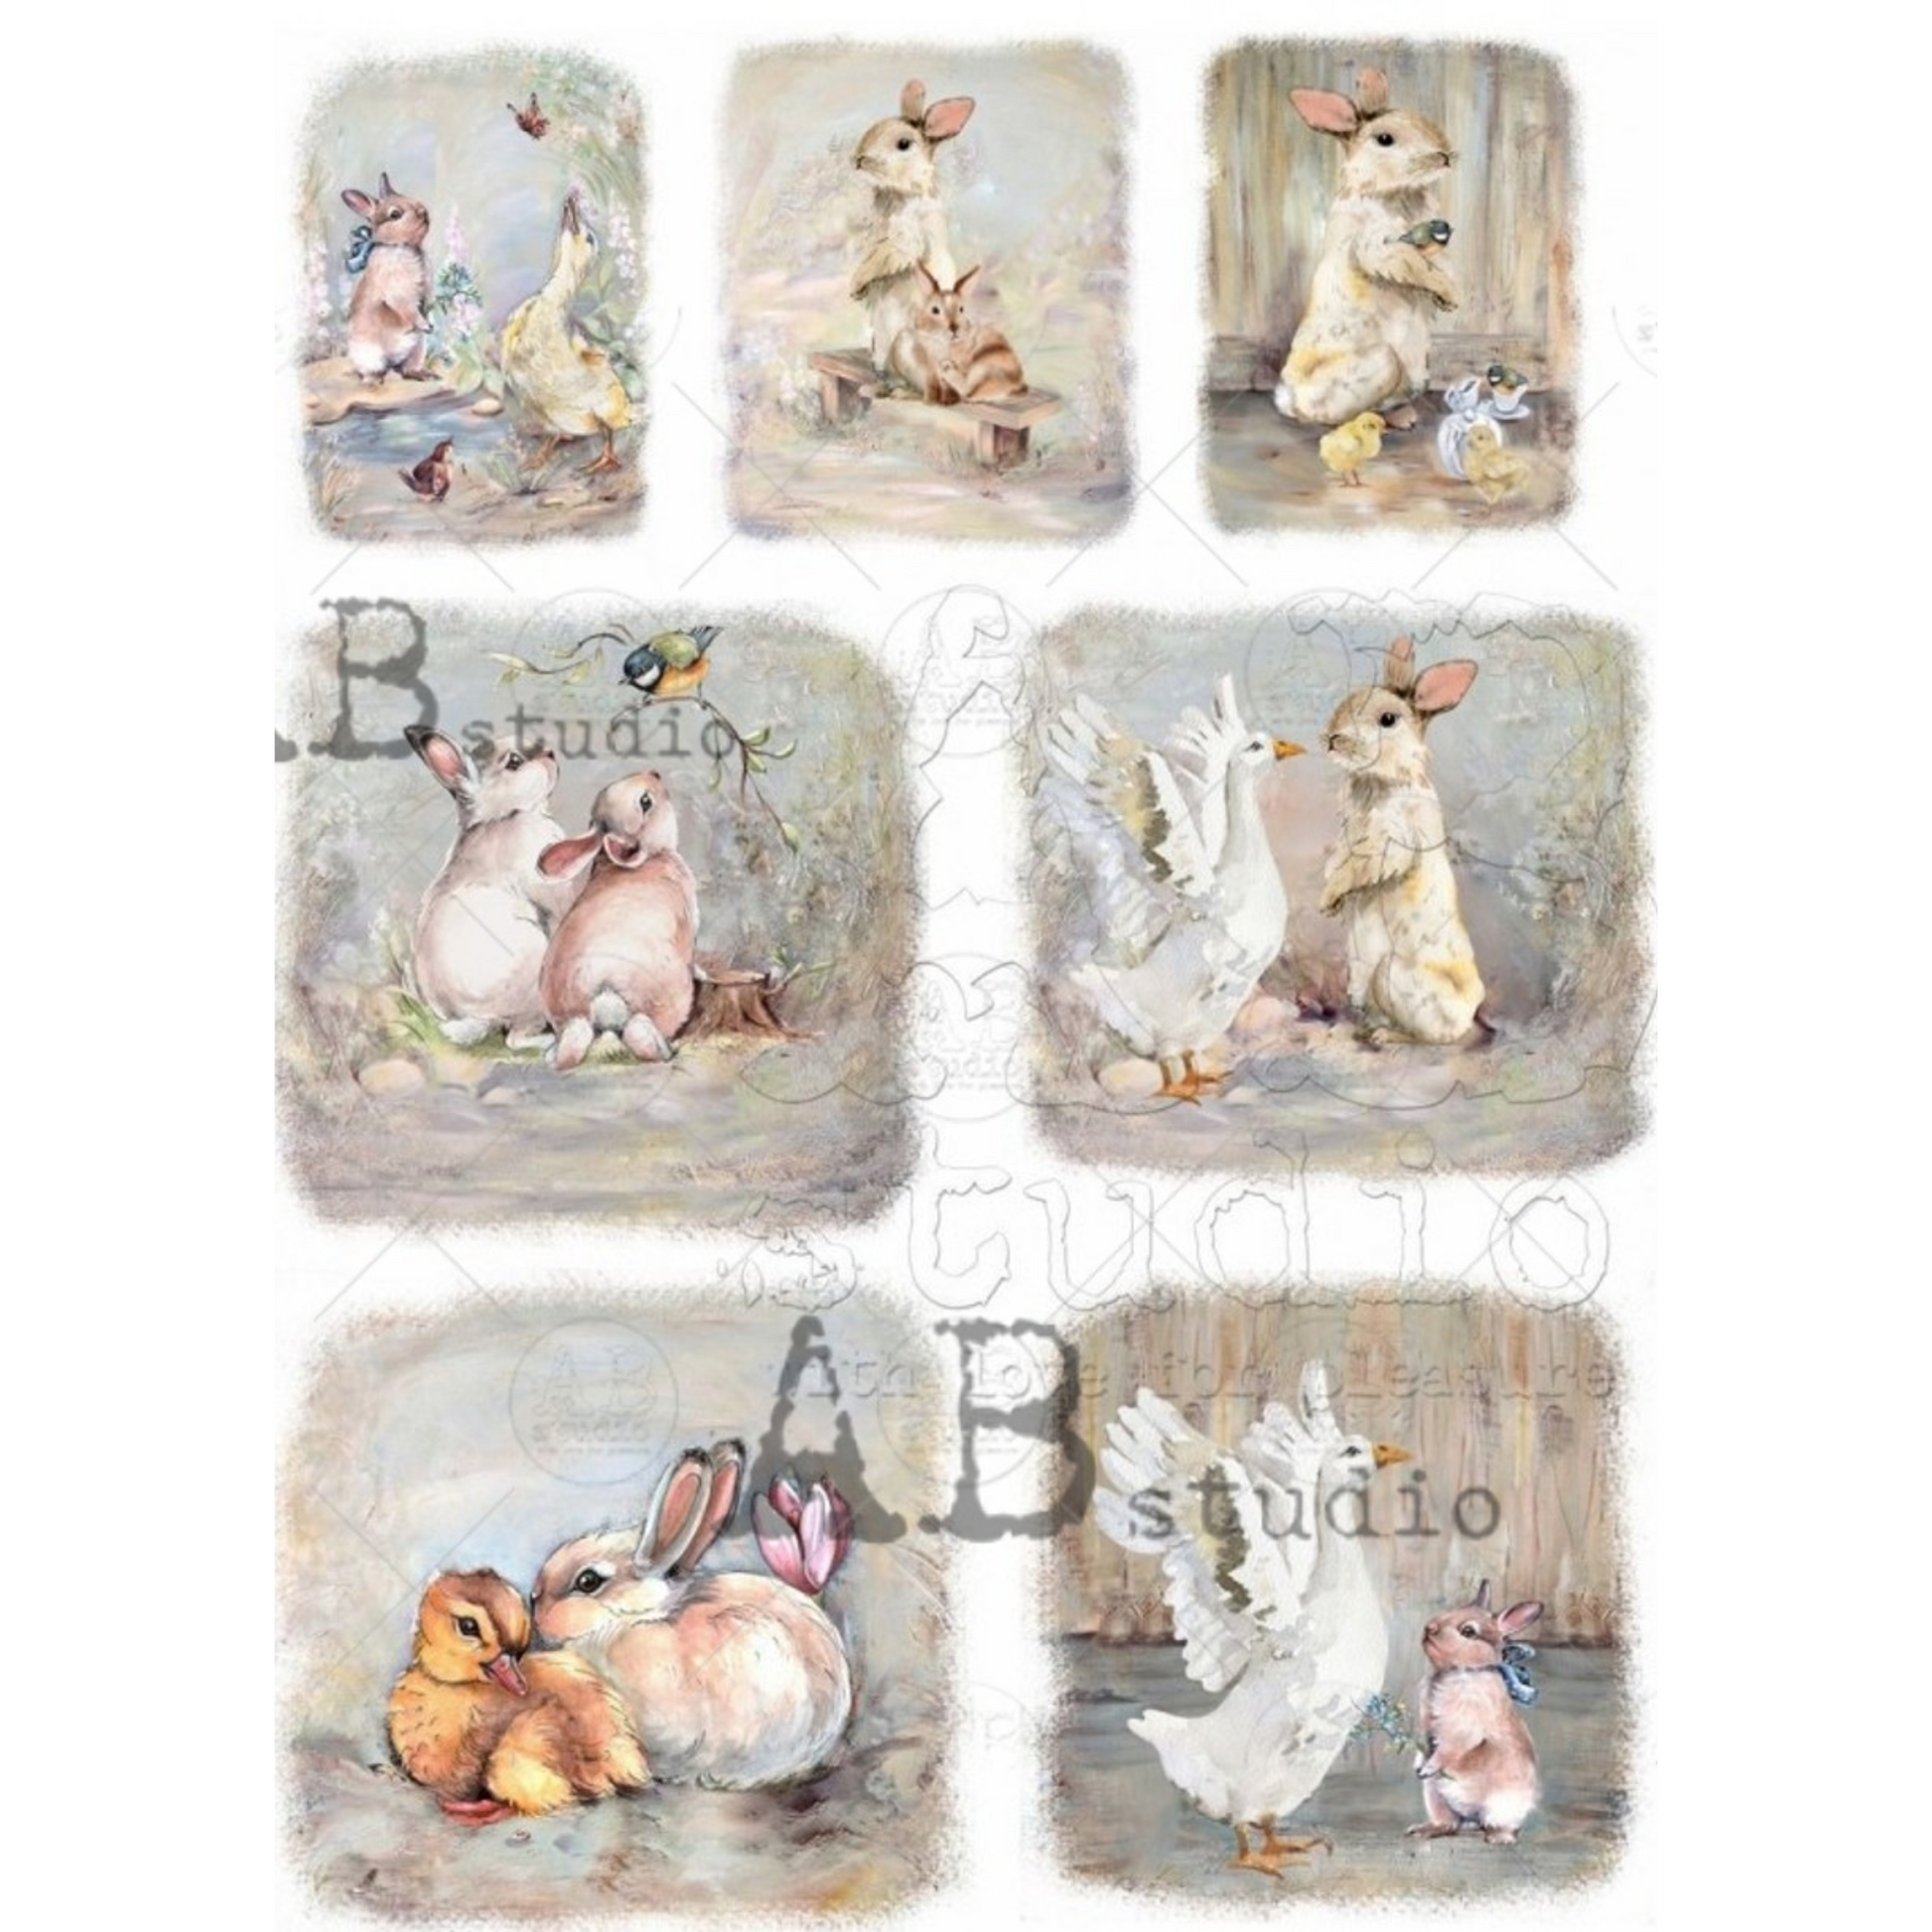 "7-Pack Watercolor Mini Easter Scenes" decoupage rice paper by AB Studio. Size A4 available at Milton's Daughter.